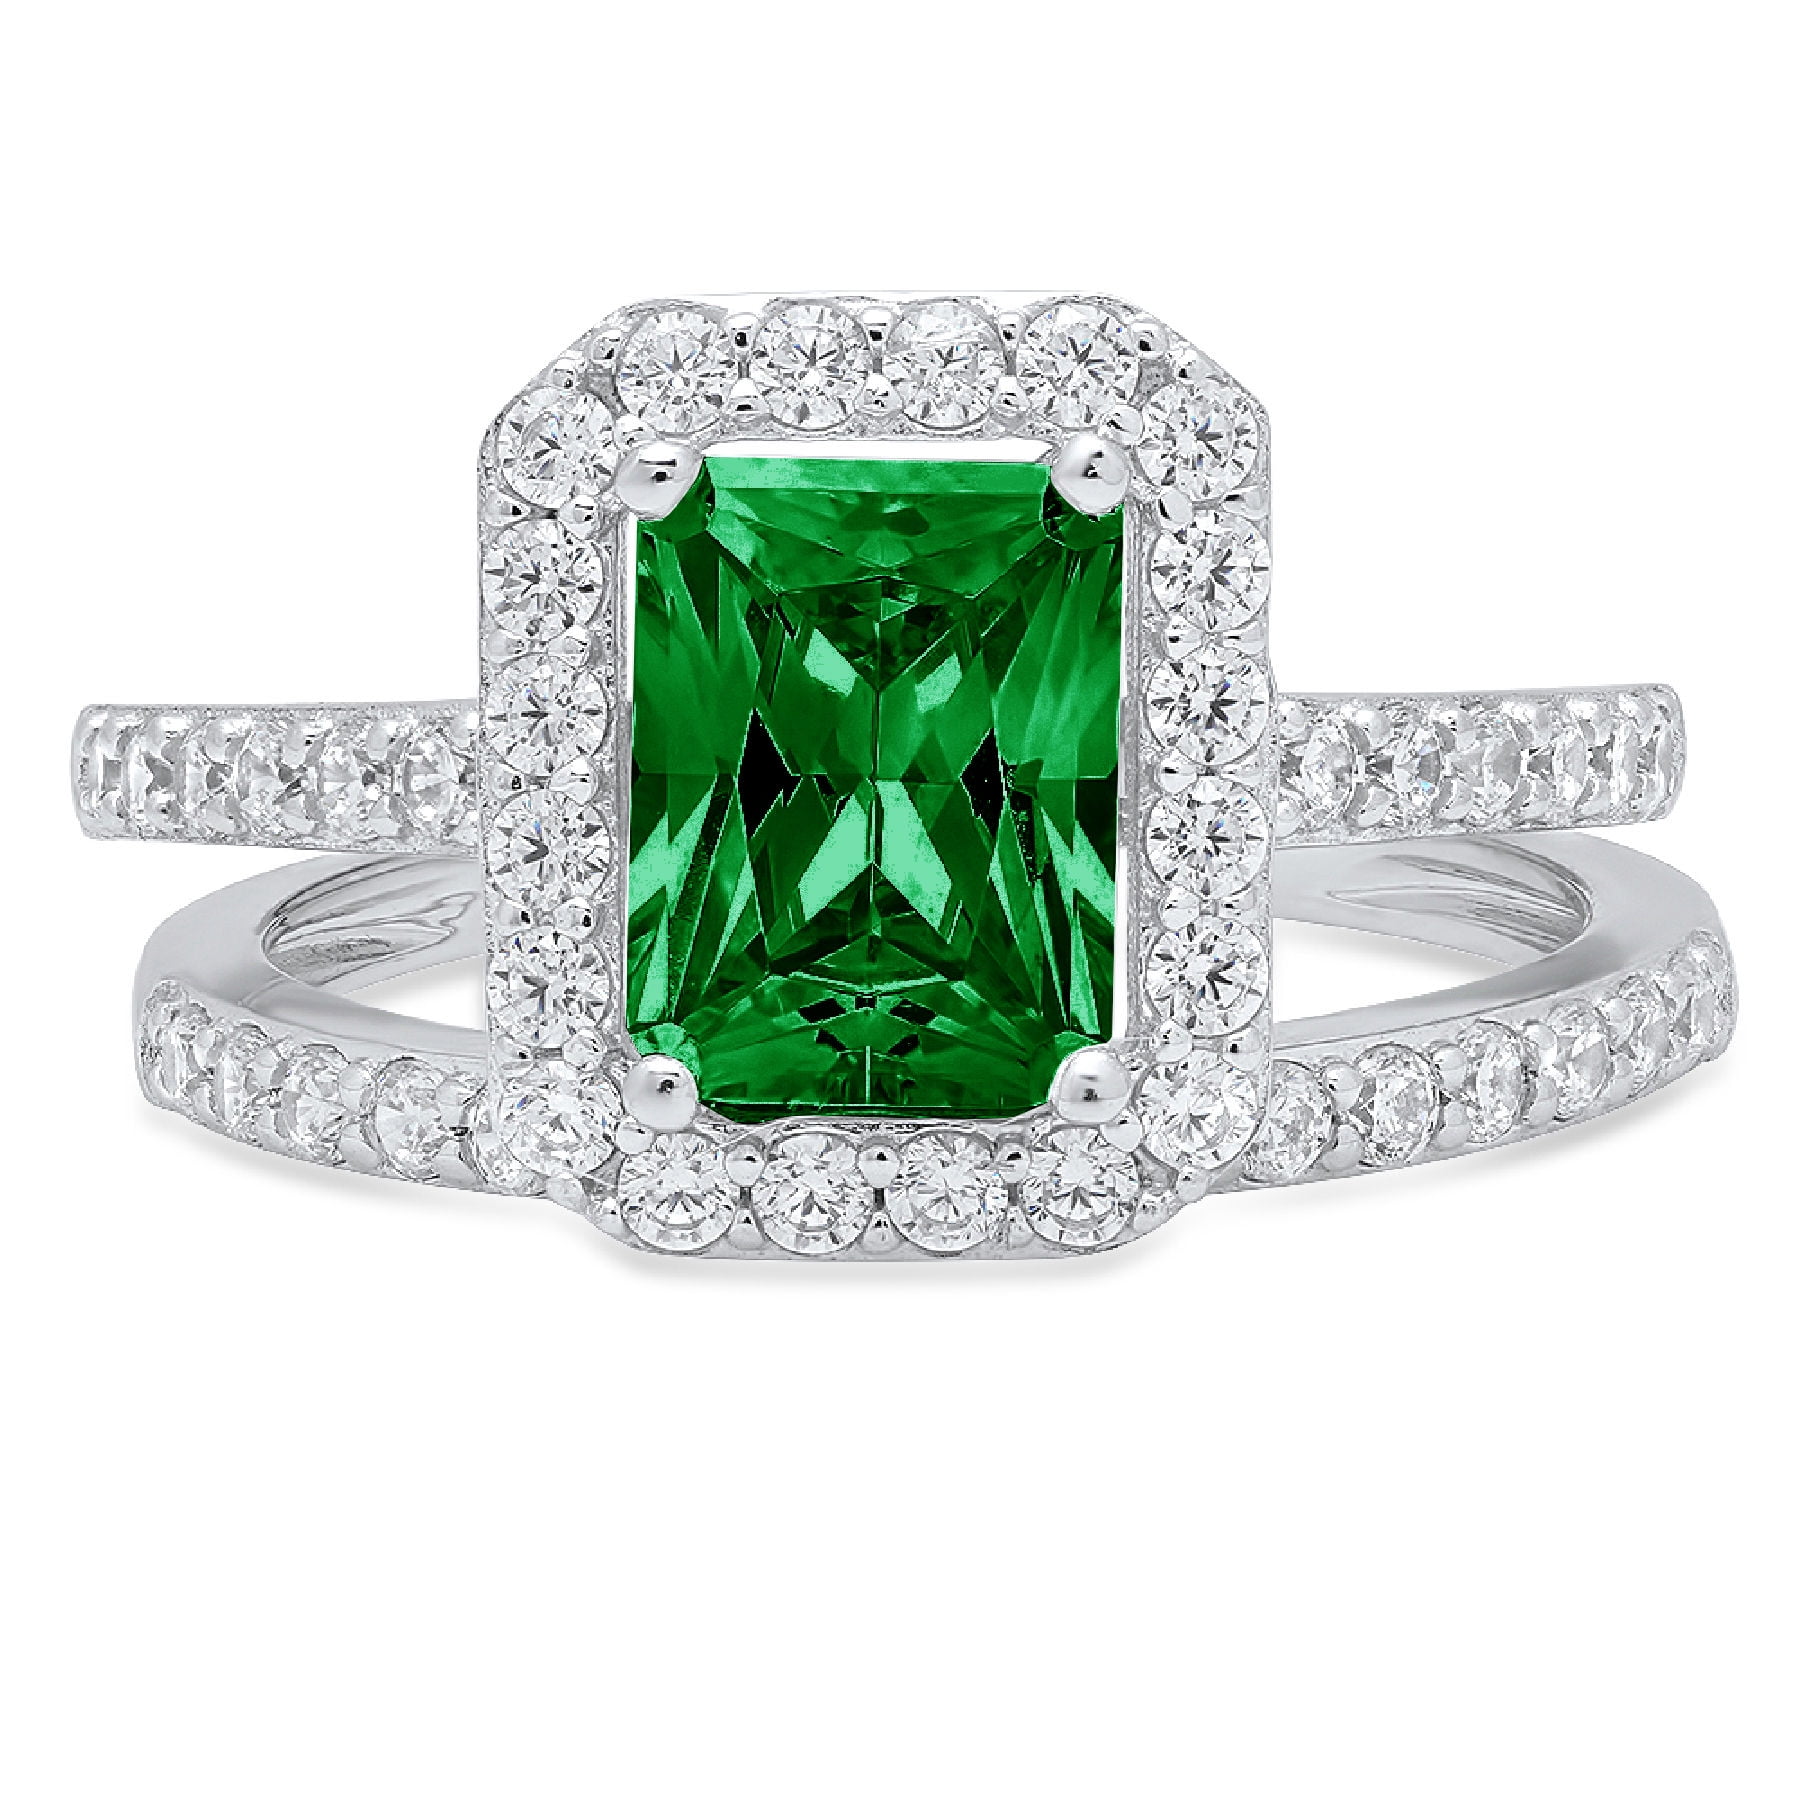 BIG 22CT EMERALD CUT SOLITAIRE COCKTAIL PARTY RING IN 925 STERLING SILVER 